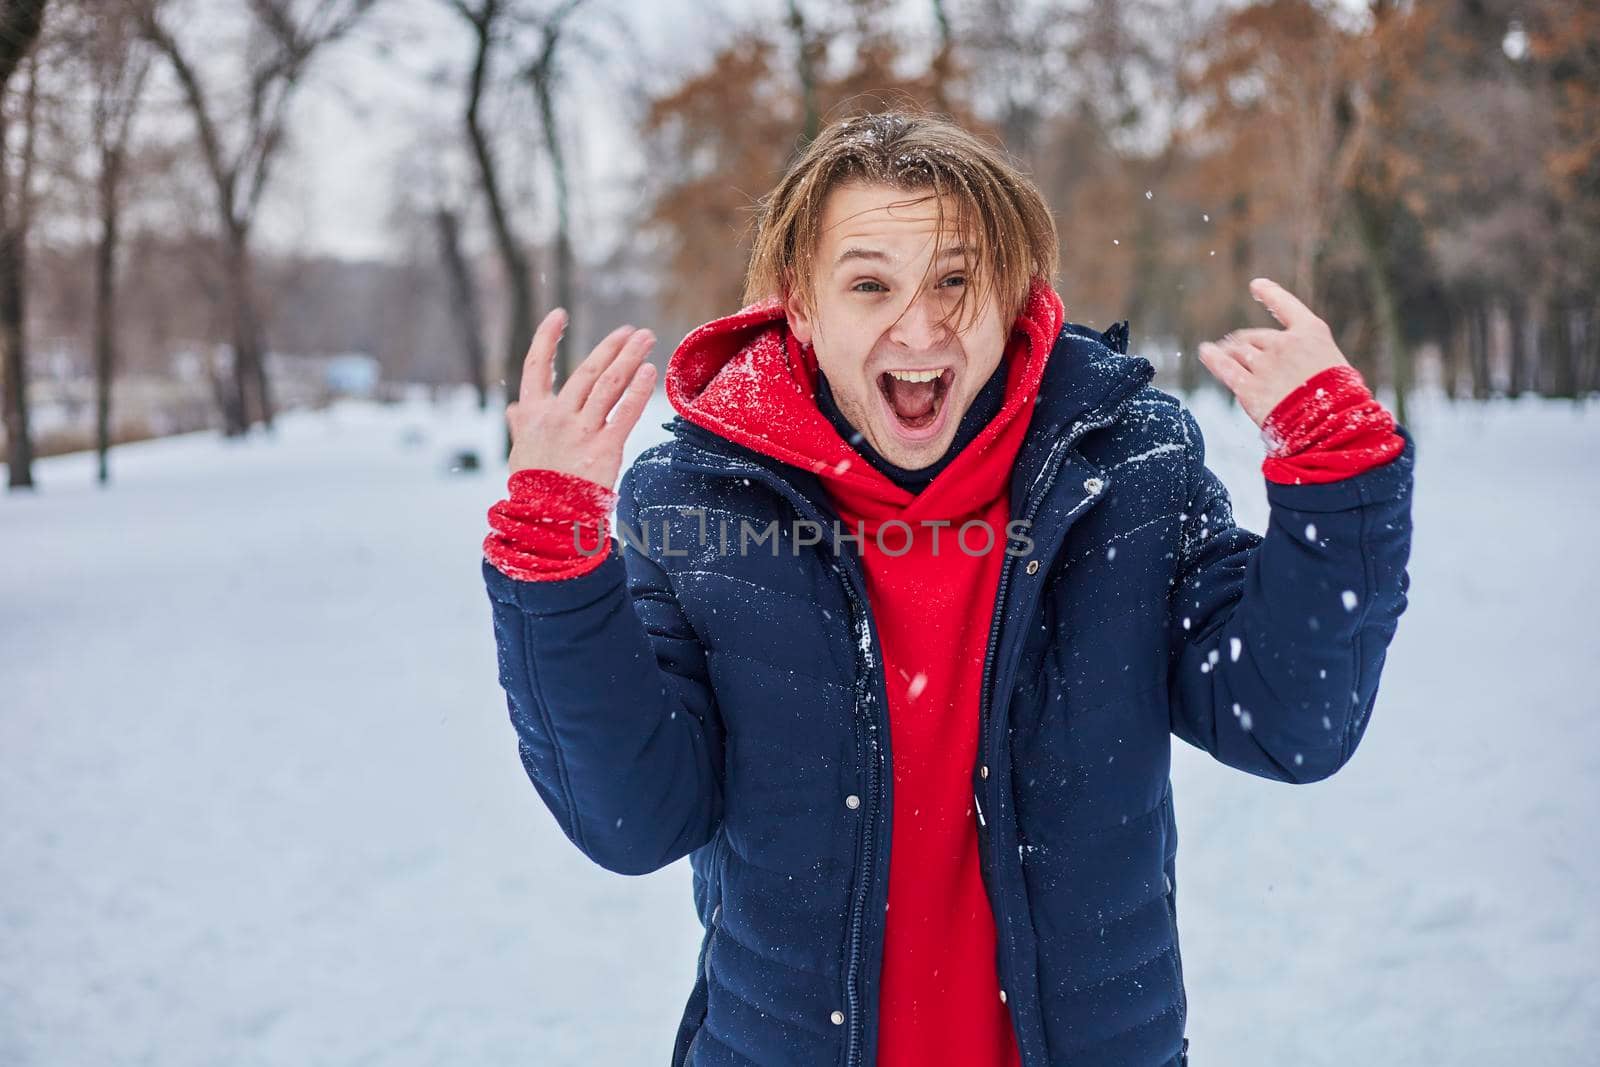 a young happy man is having fun in a winter park, throwing snow, it is cold in his hands, the emissions are off scale